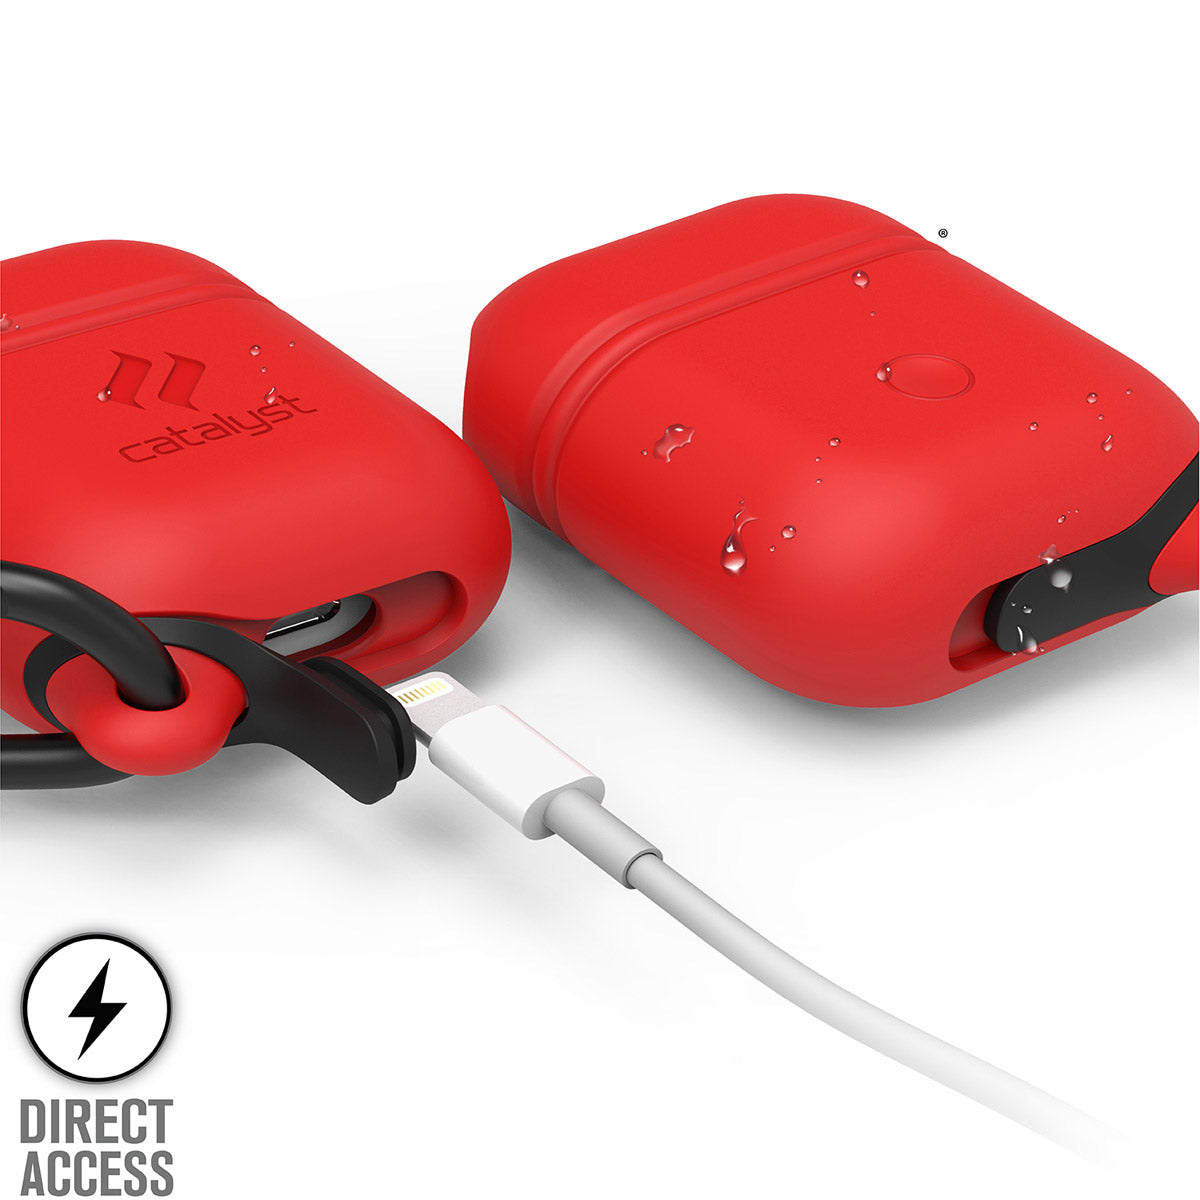 Catalyst airpods gen2/1 waterproof case + carabiner showing the front and back with lightning port in flame red text reads direct access